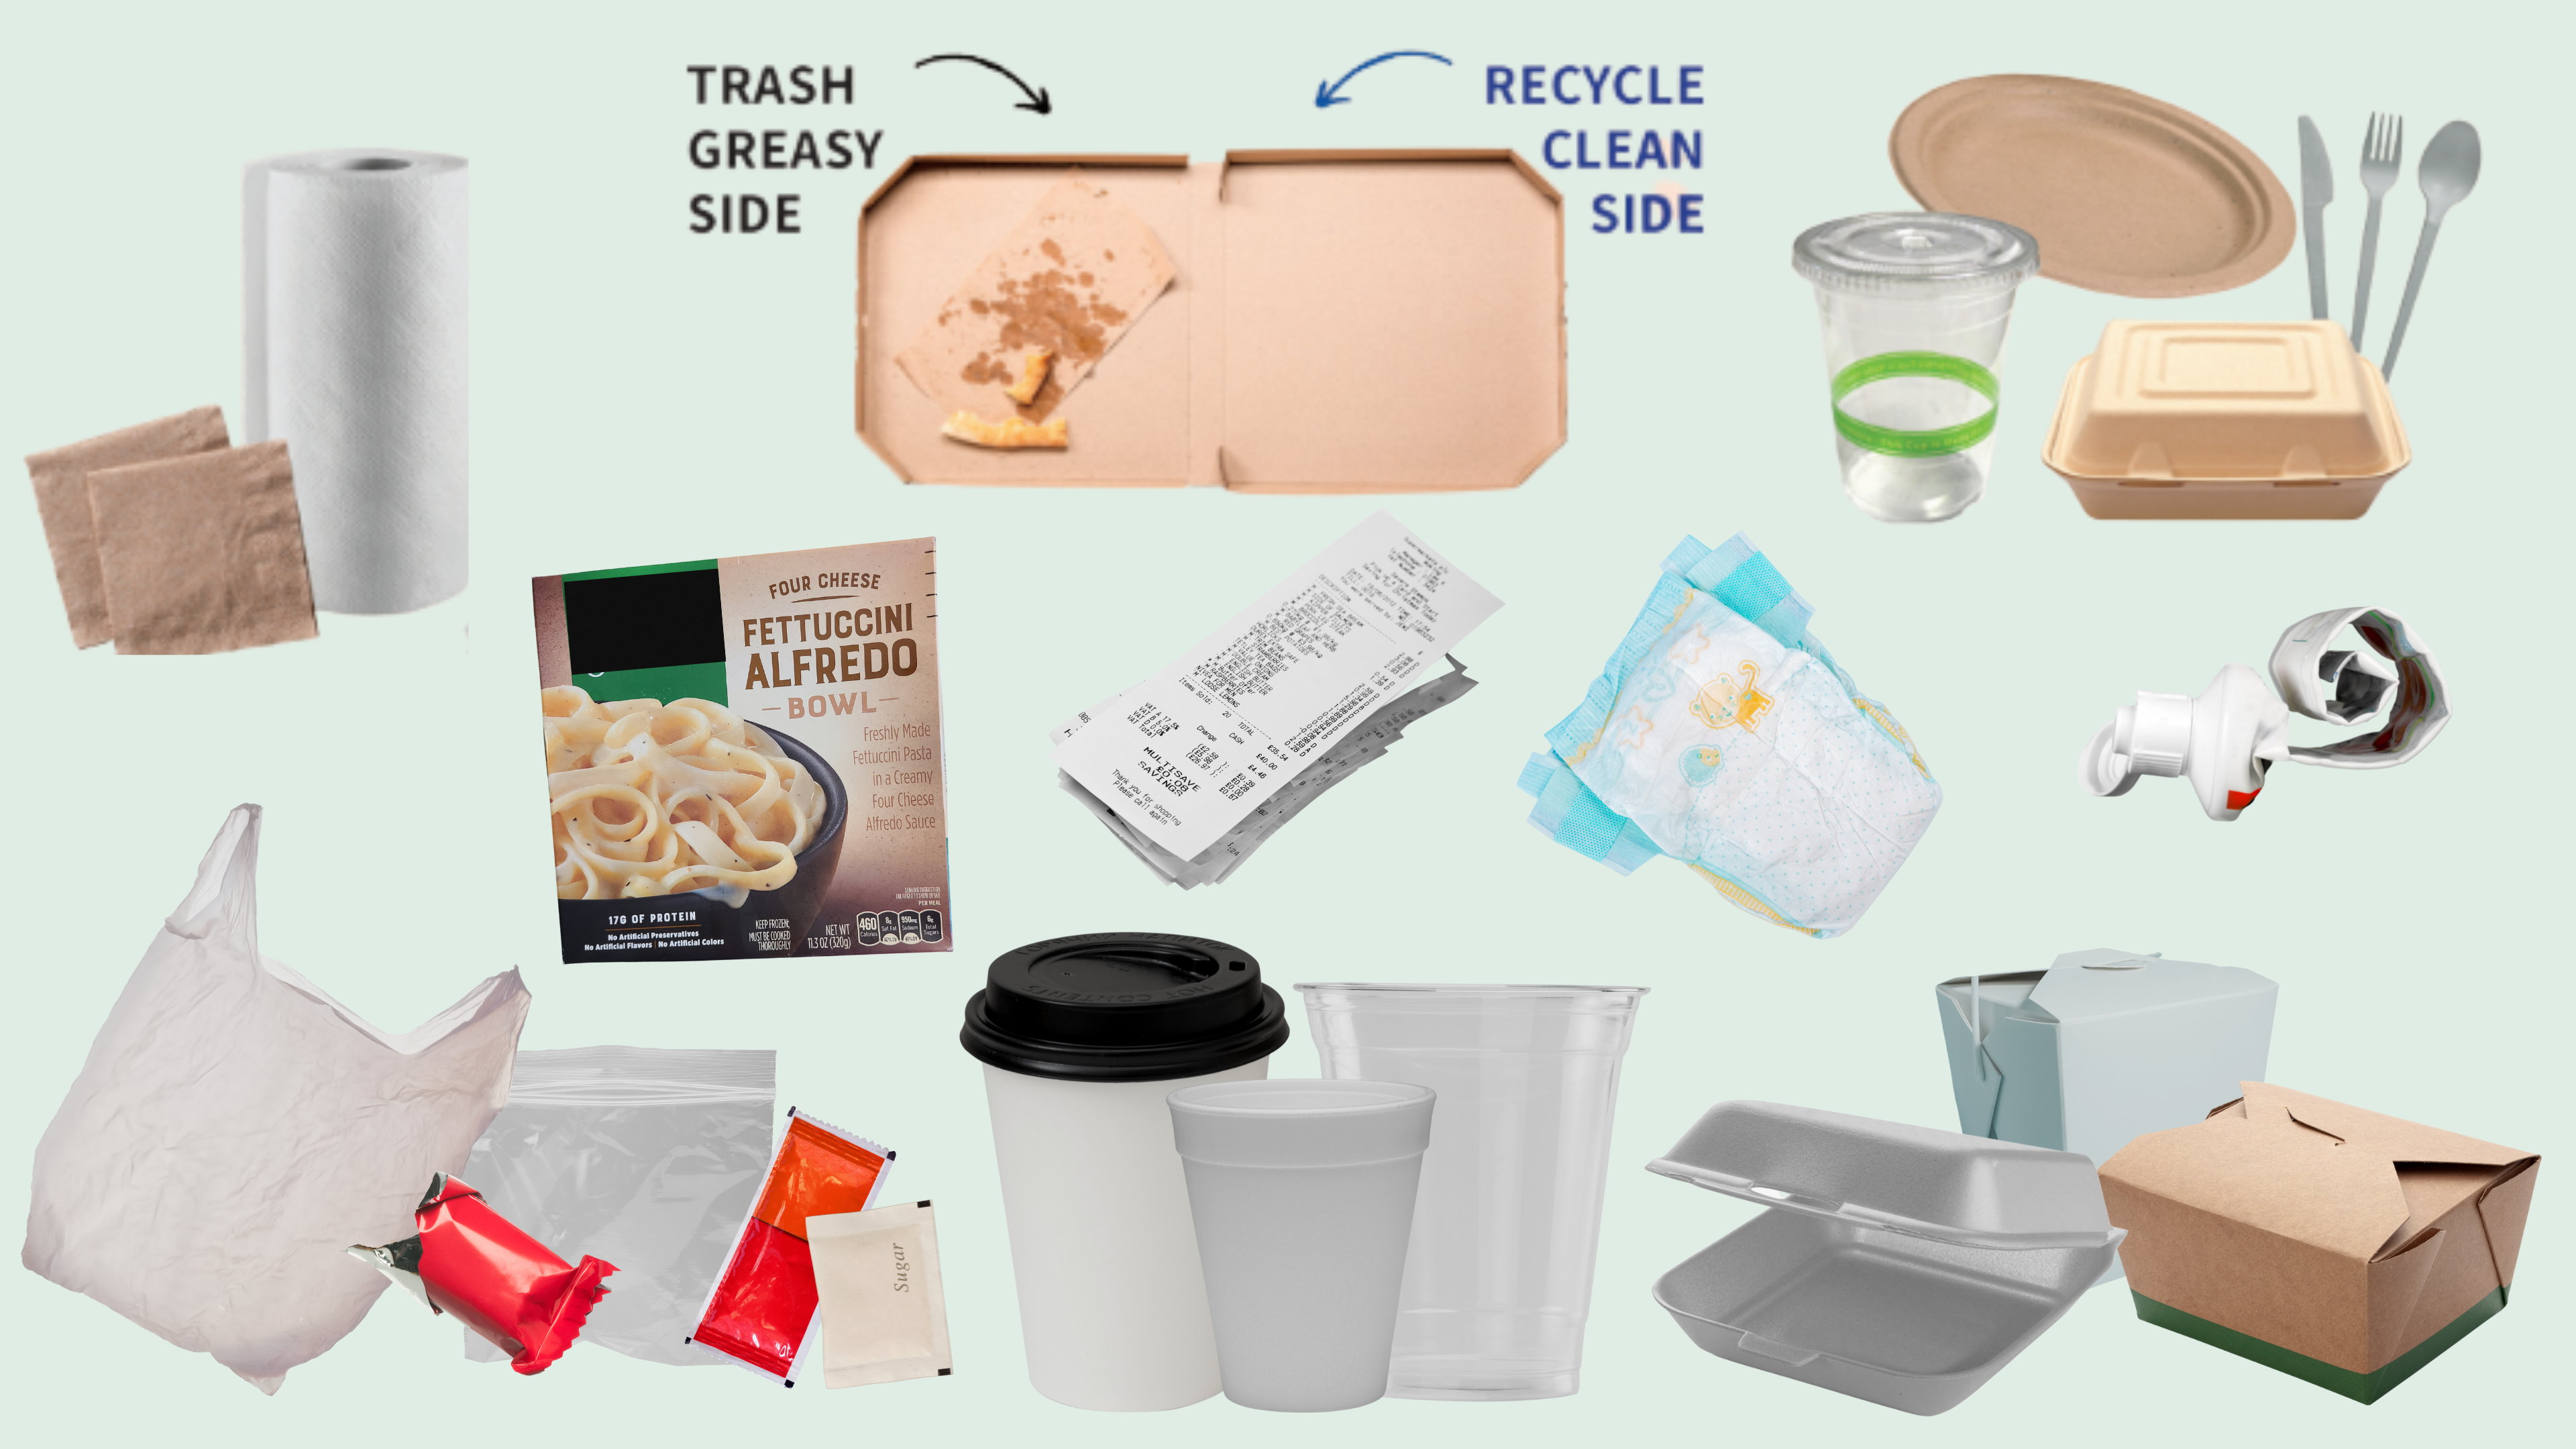 Put paper products, greasy pizza boxes, compostable products, coffee cups, polystyrene, tubes and more in the trash.